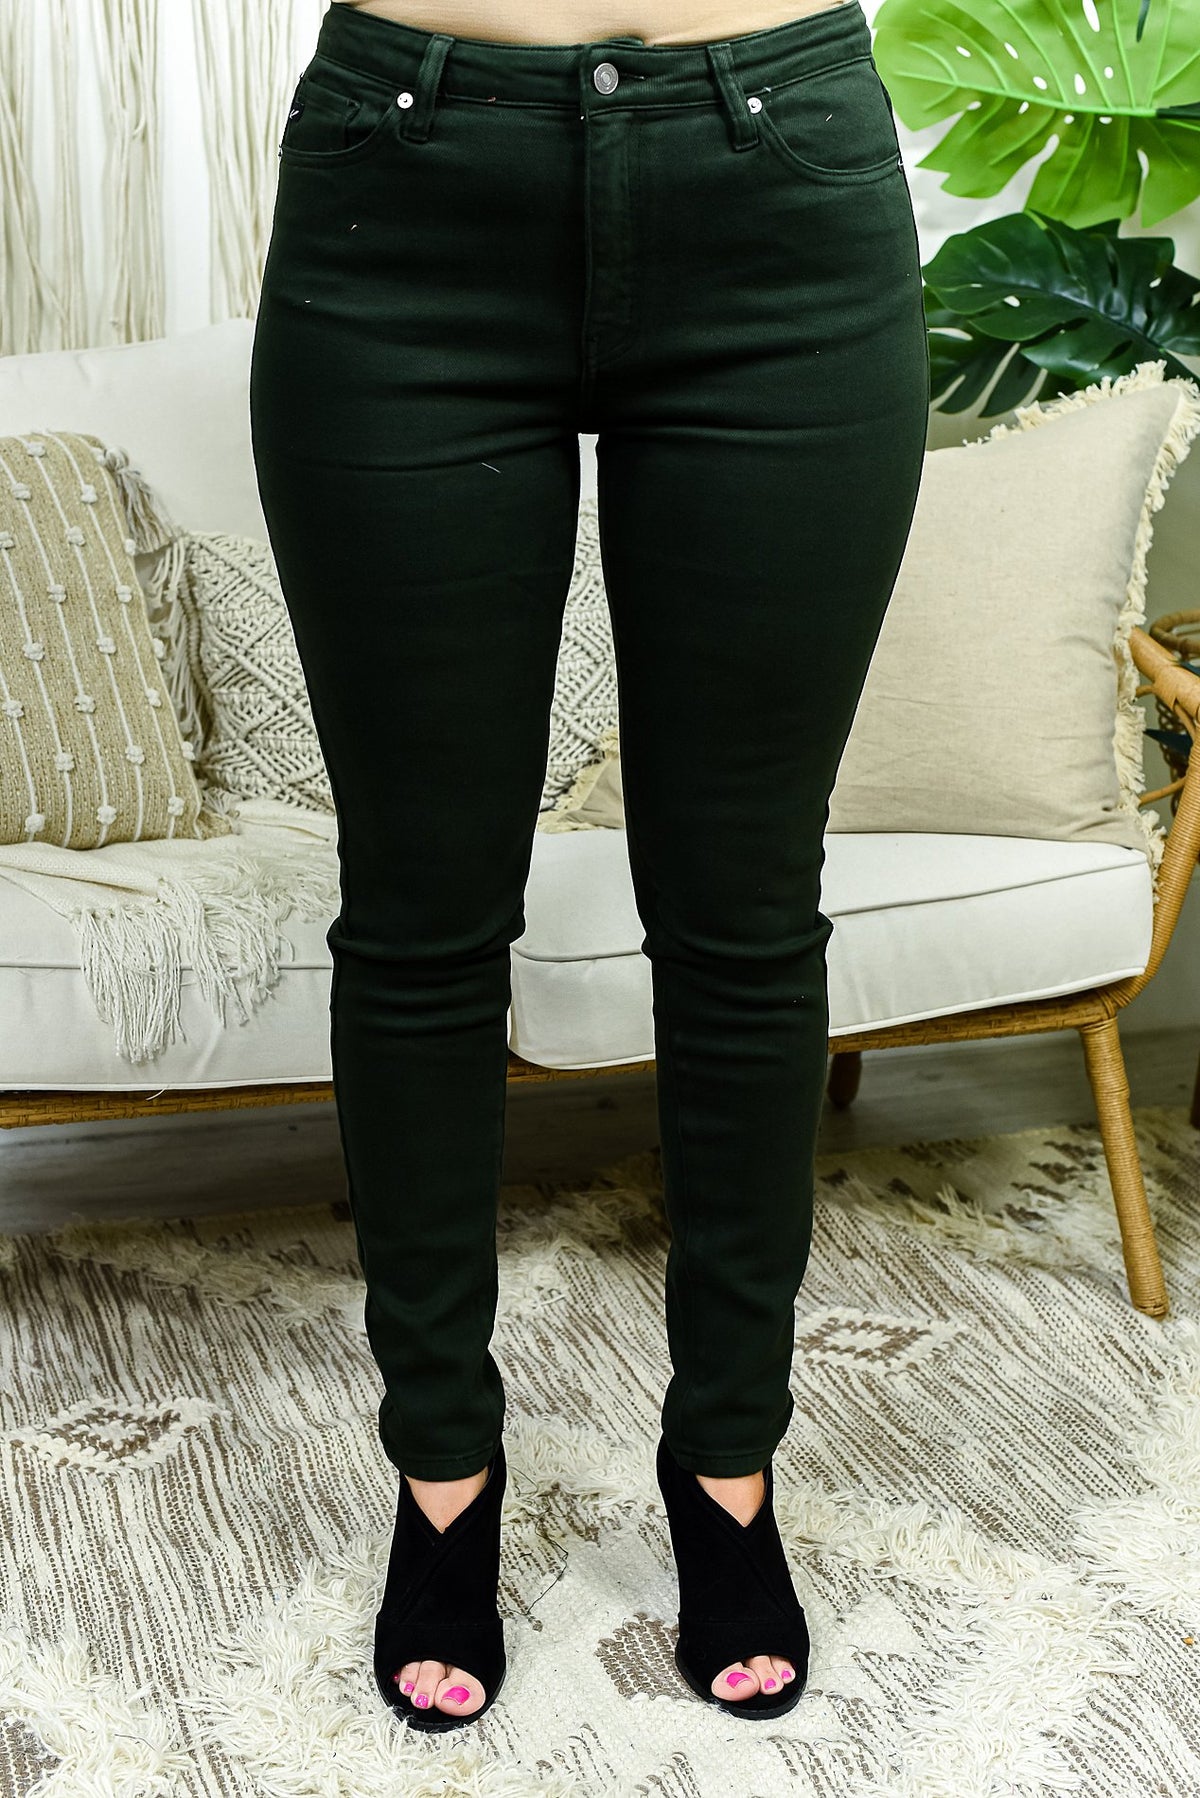 The New Look Olive Jeans - K669OL